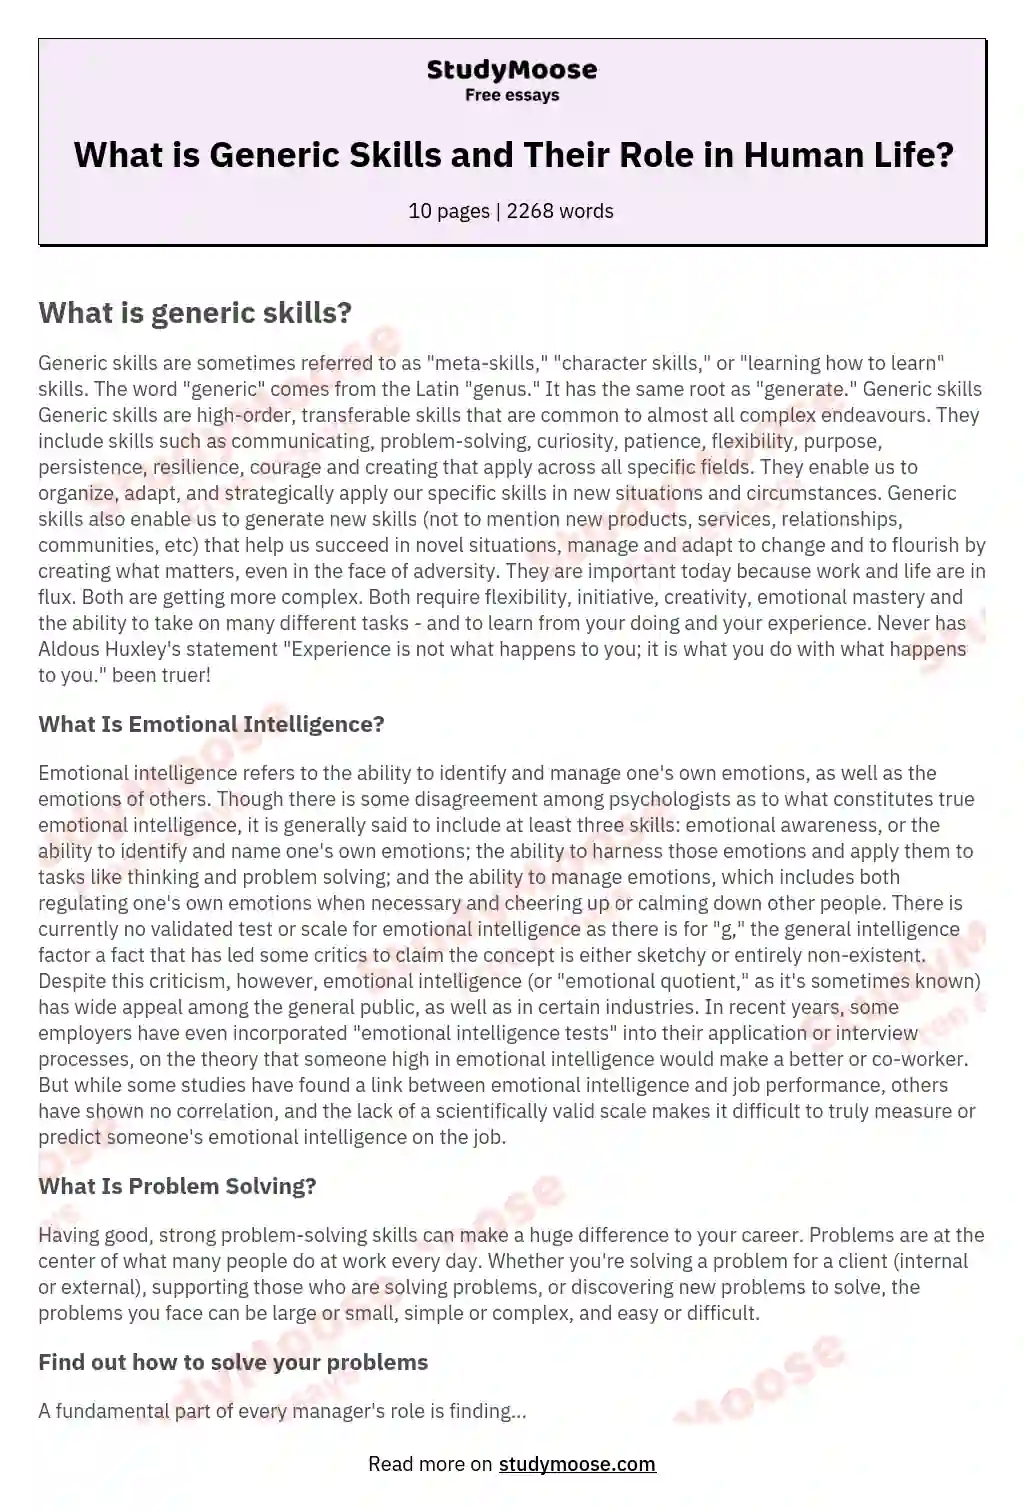 What is Generic Skills and Their Role in Human Life? essay